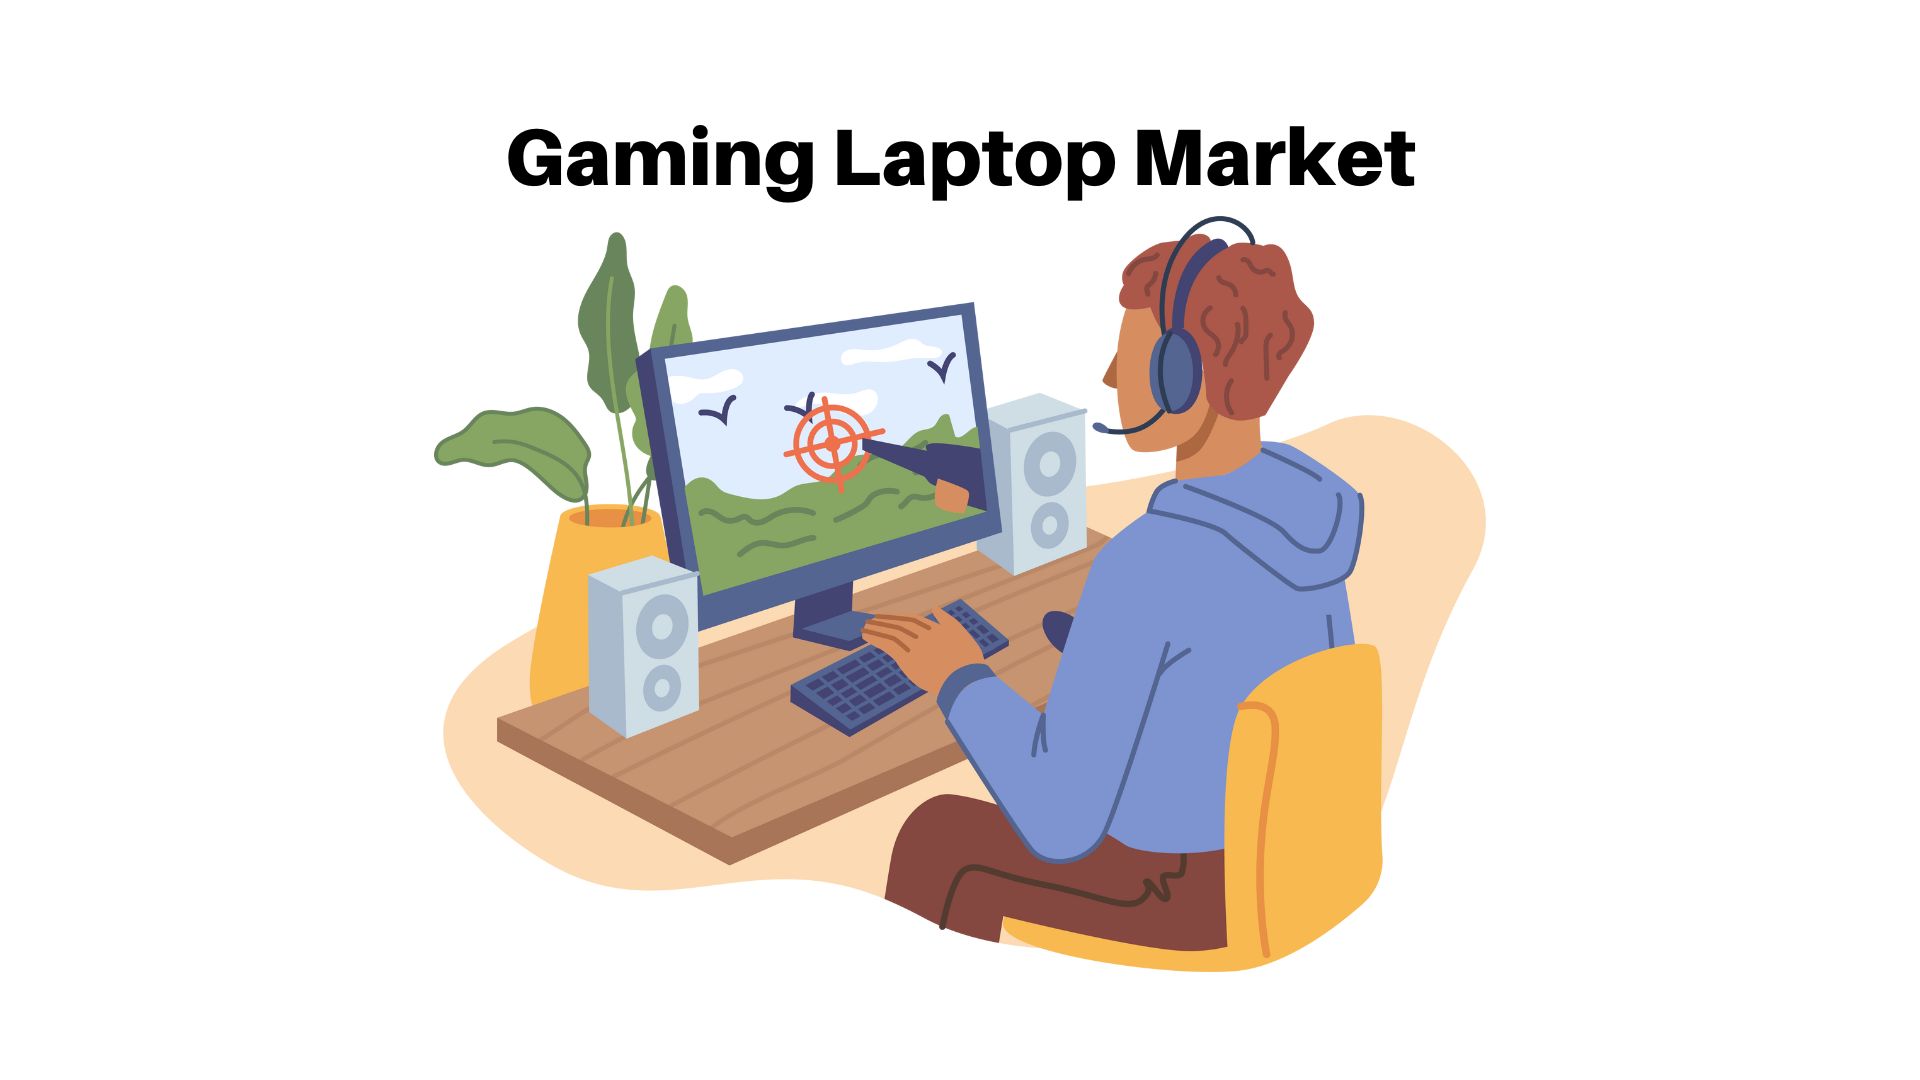 Gaming Laptop Market Size is valued at USD 9.07 Billion in 2023, growing at a CAGR of 6.5%